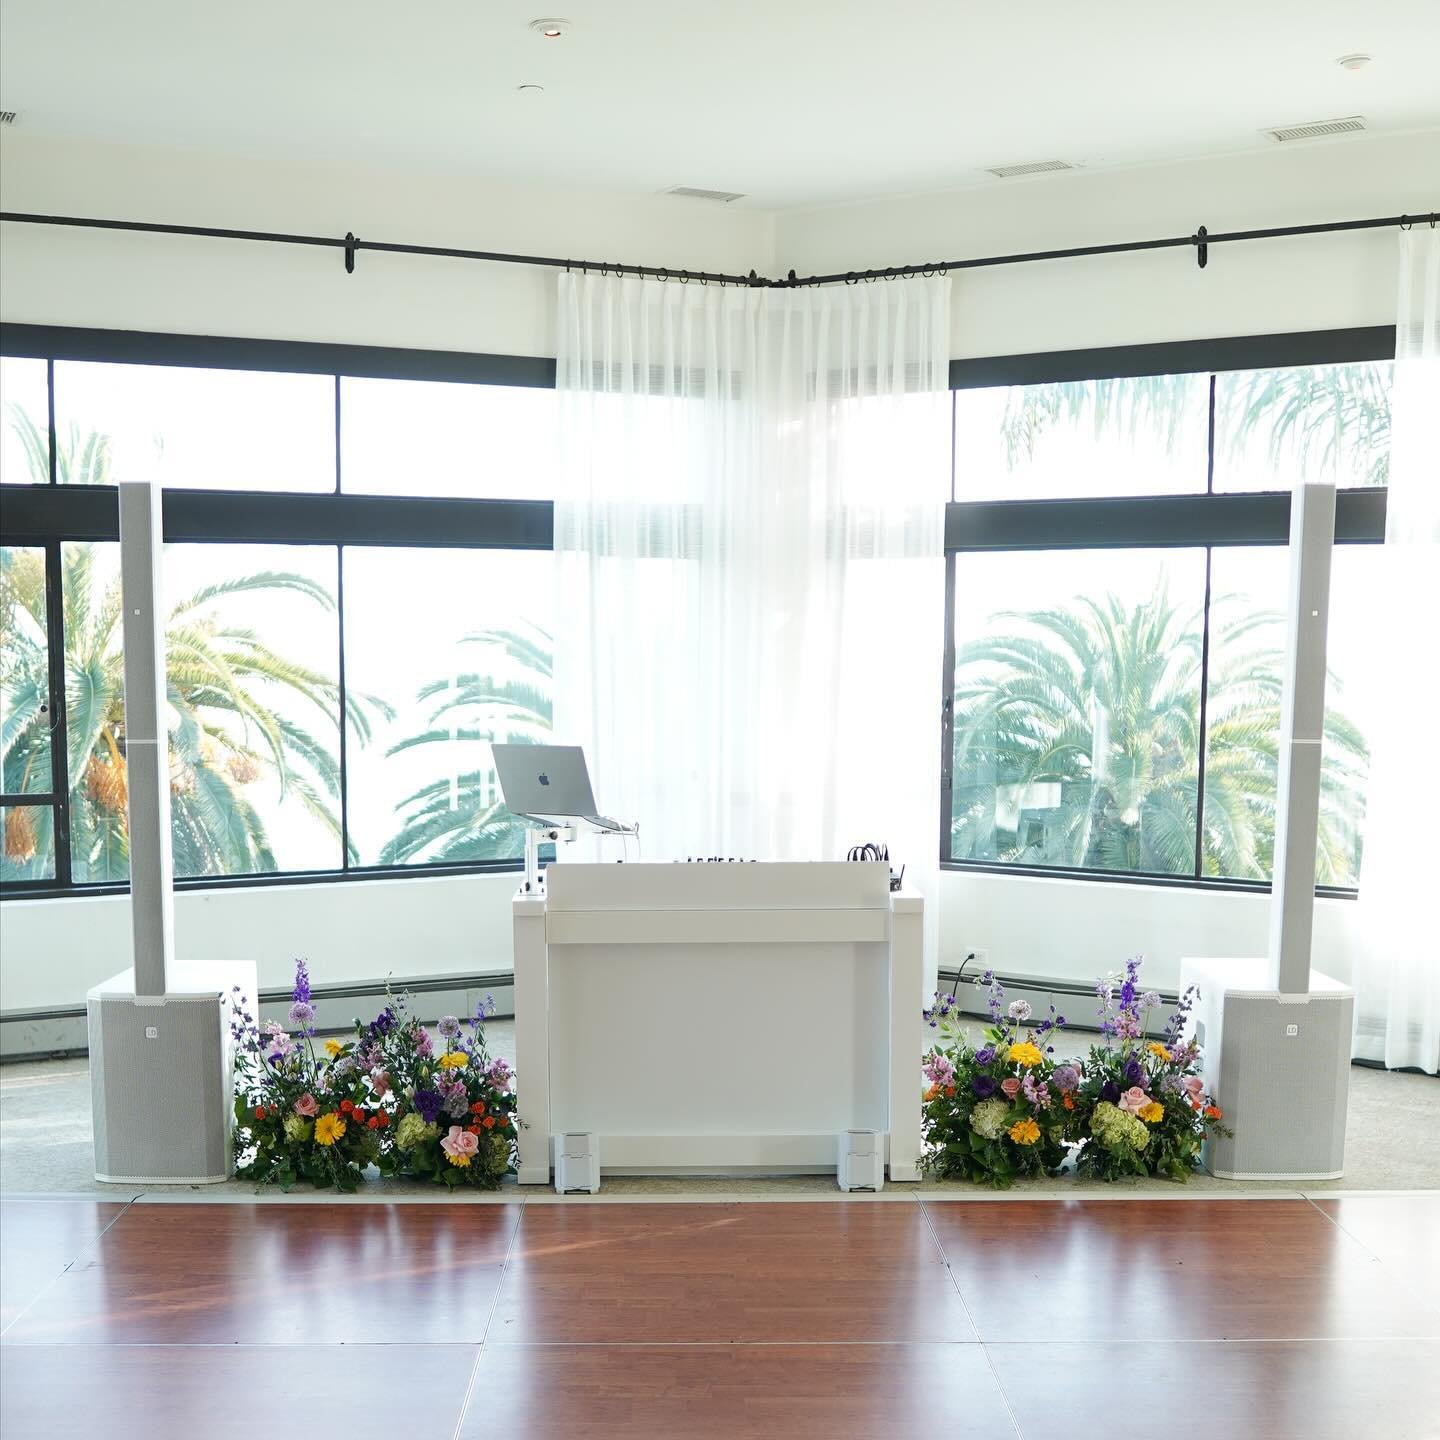 Introducing our all-white setup, including our new sleek DJ booth and column array speakers. This clean, modern setup is sure to complement events that demand a more elegant look, including this coastal wedding last week at the beautiful @belairbaycl